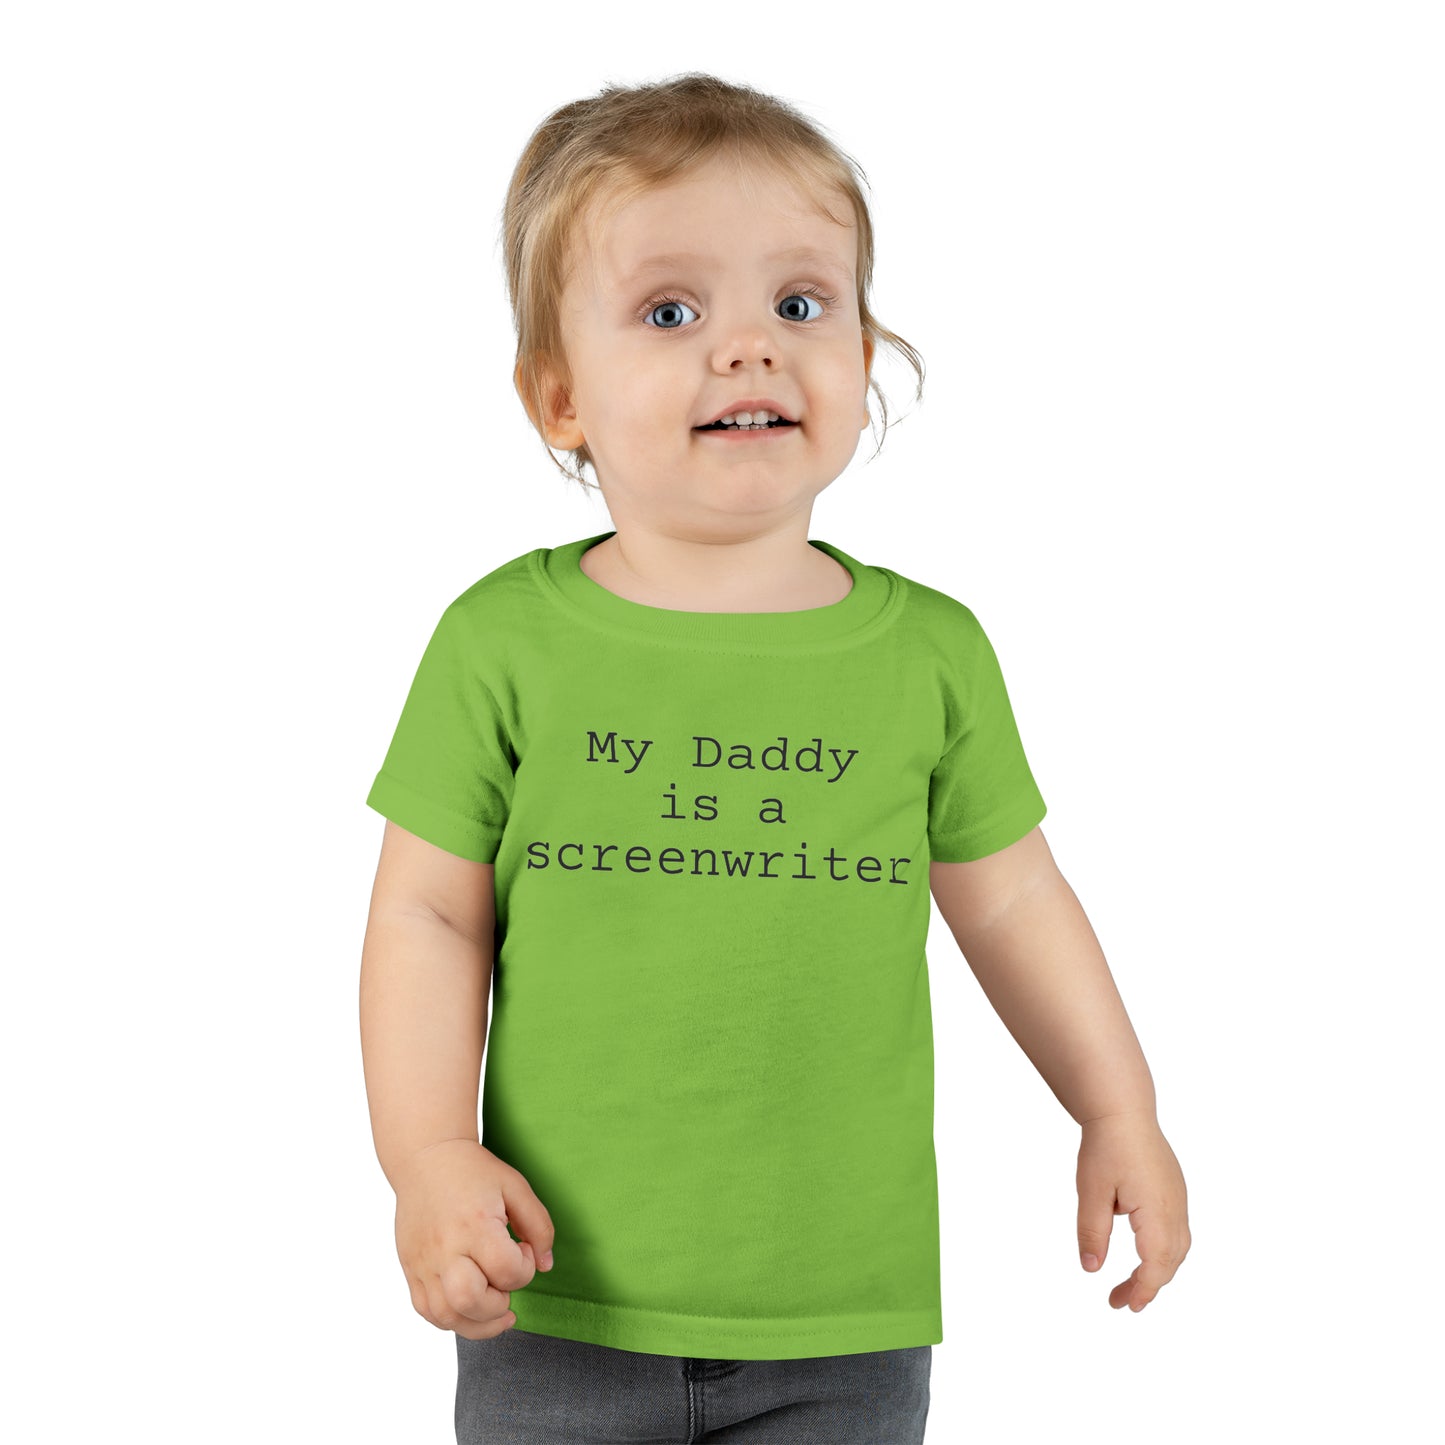 My Daddy is a Screenwriter Toddler T-shirt